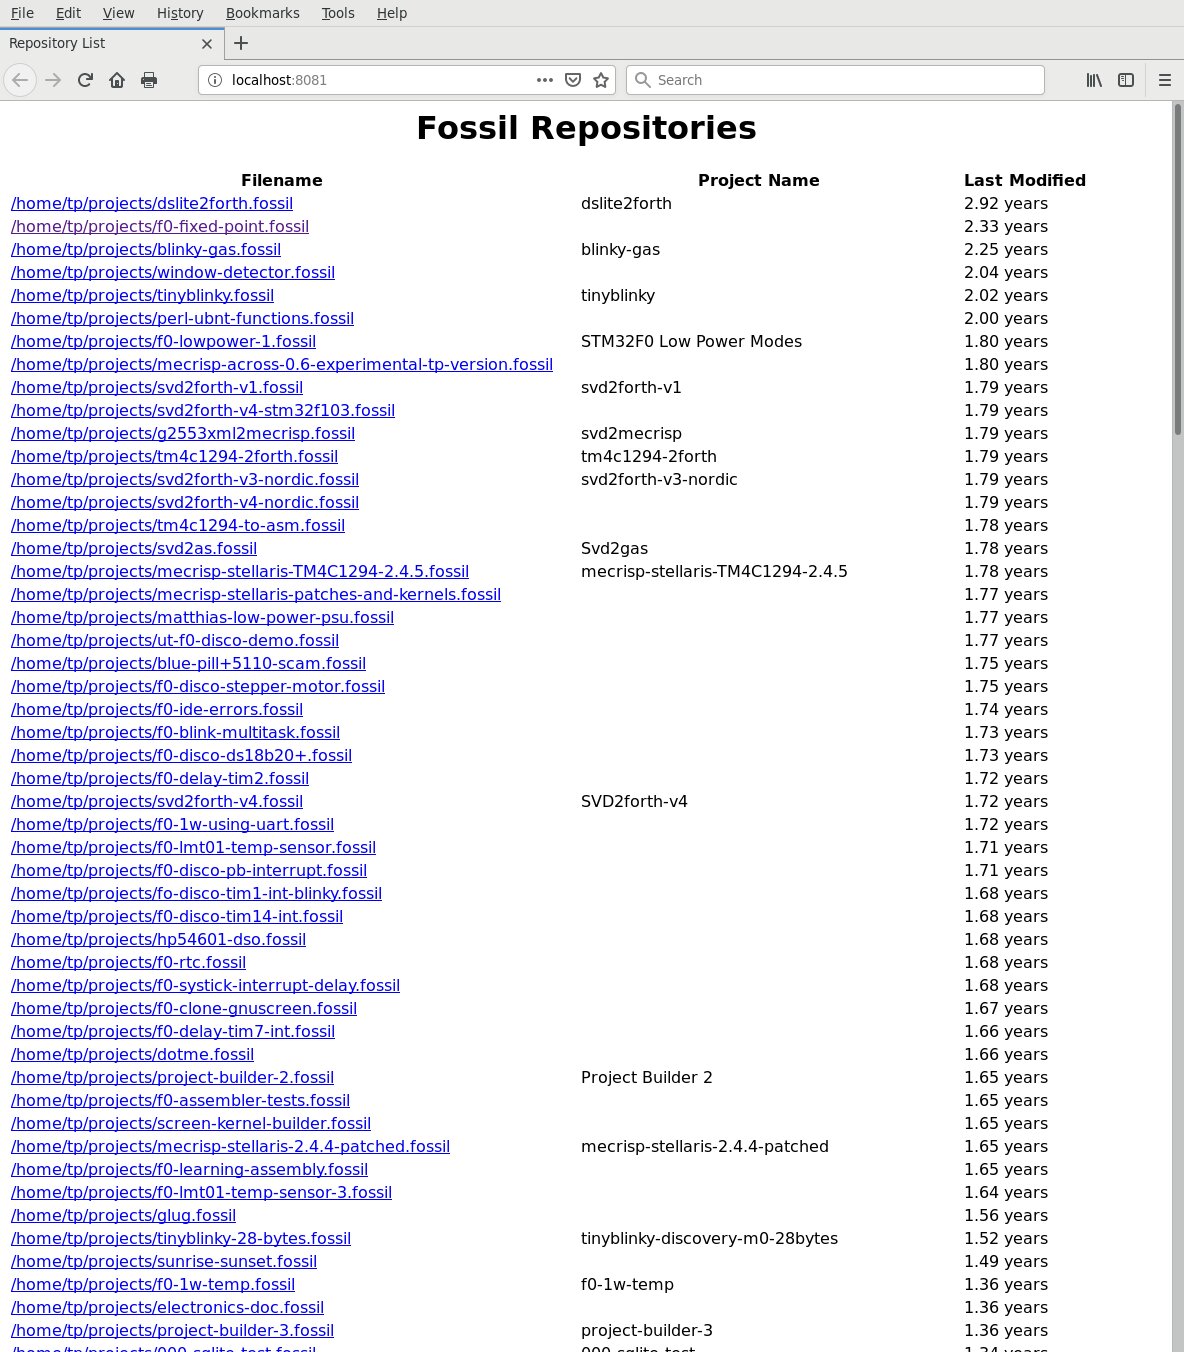 _images/fossil-view-all-repos.jpg